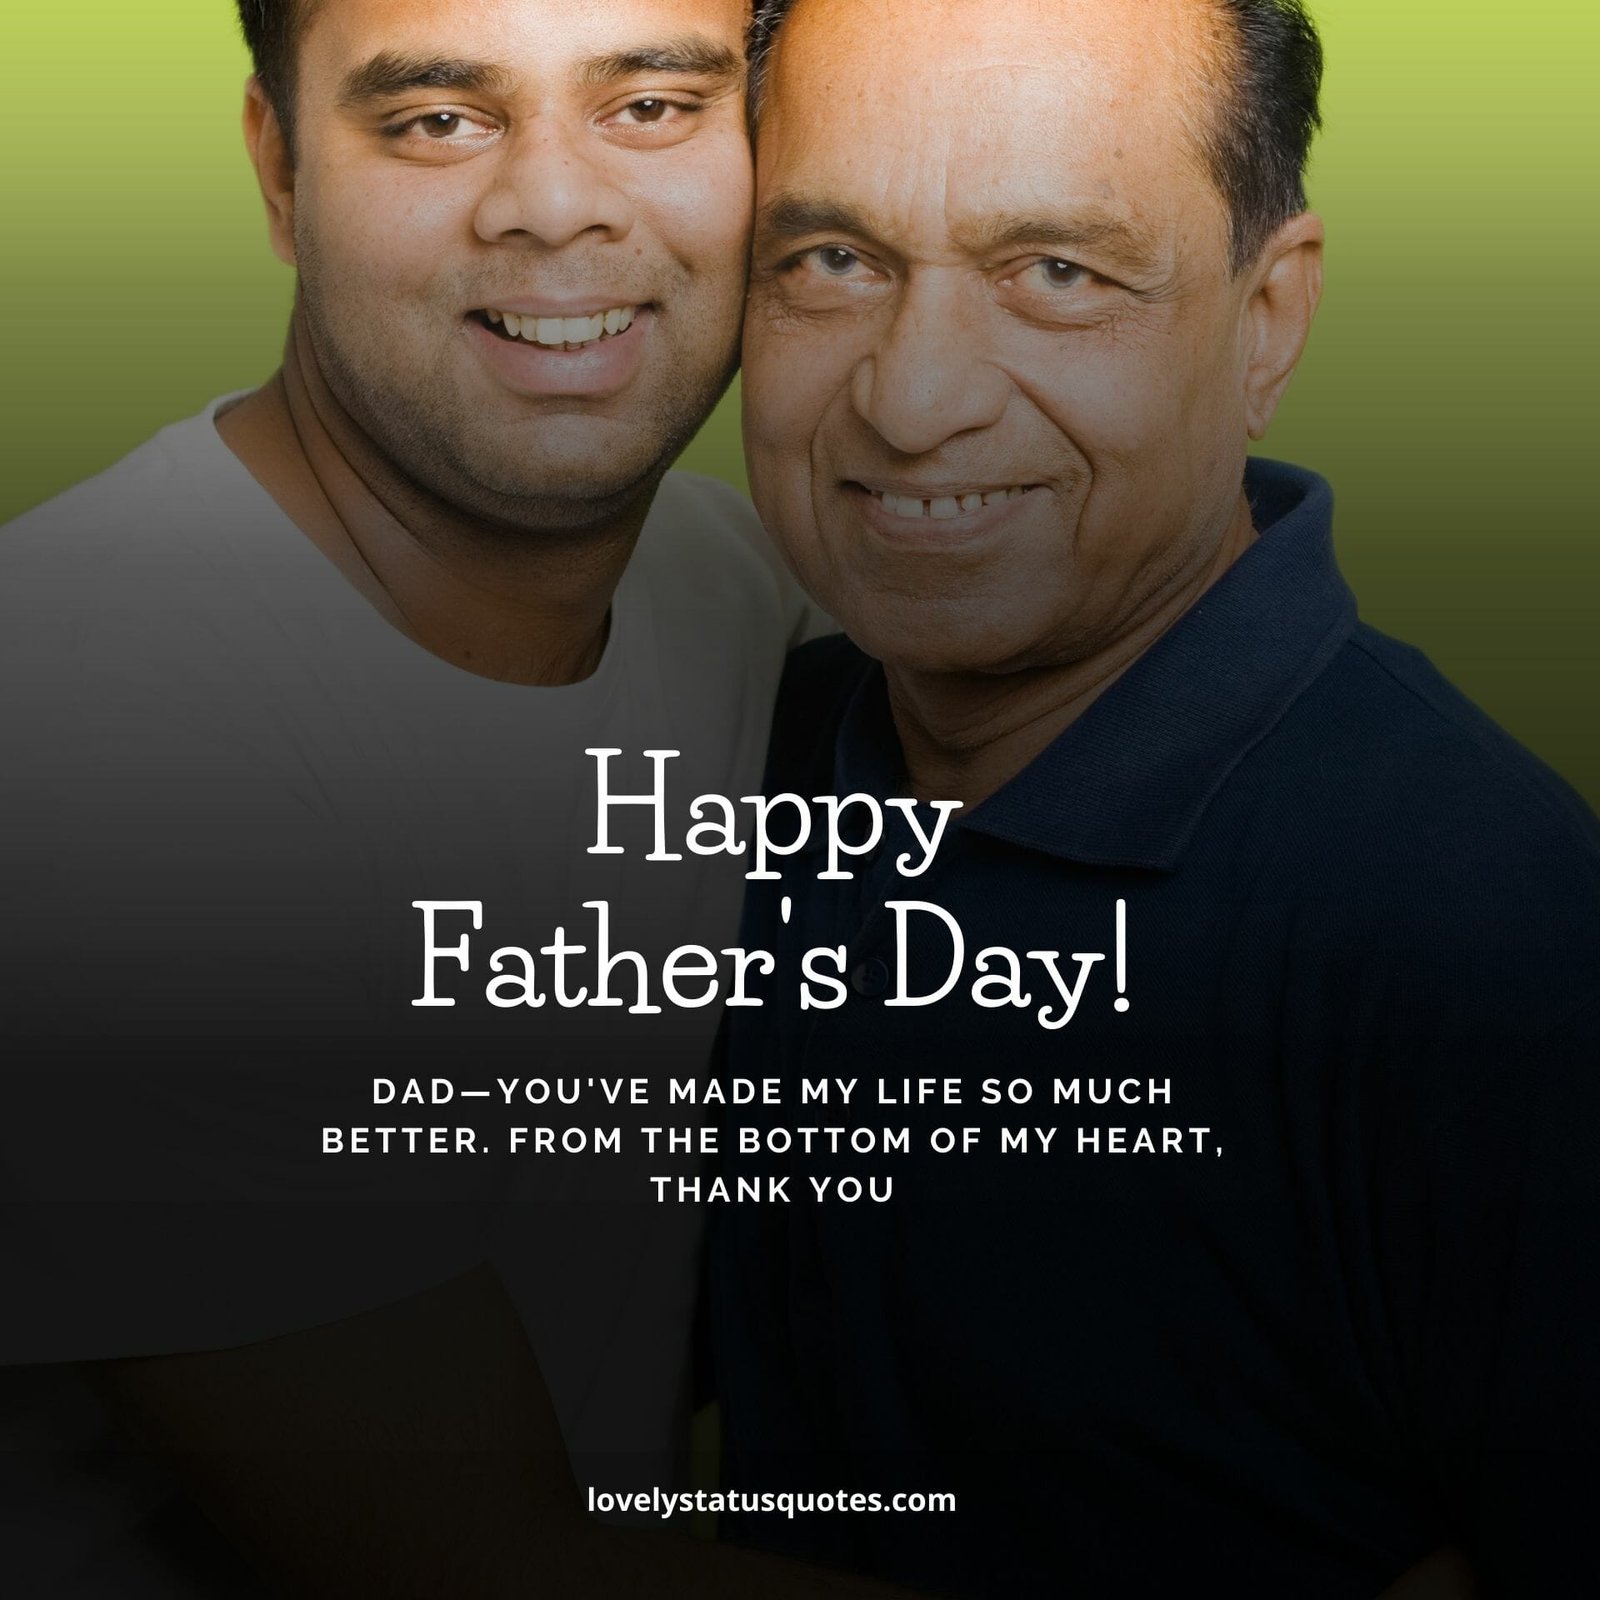 happy father's day photos hd